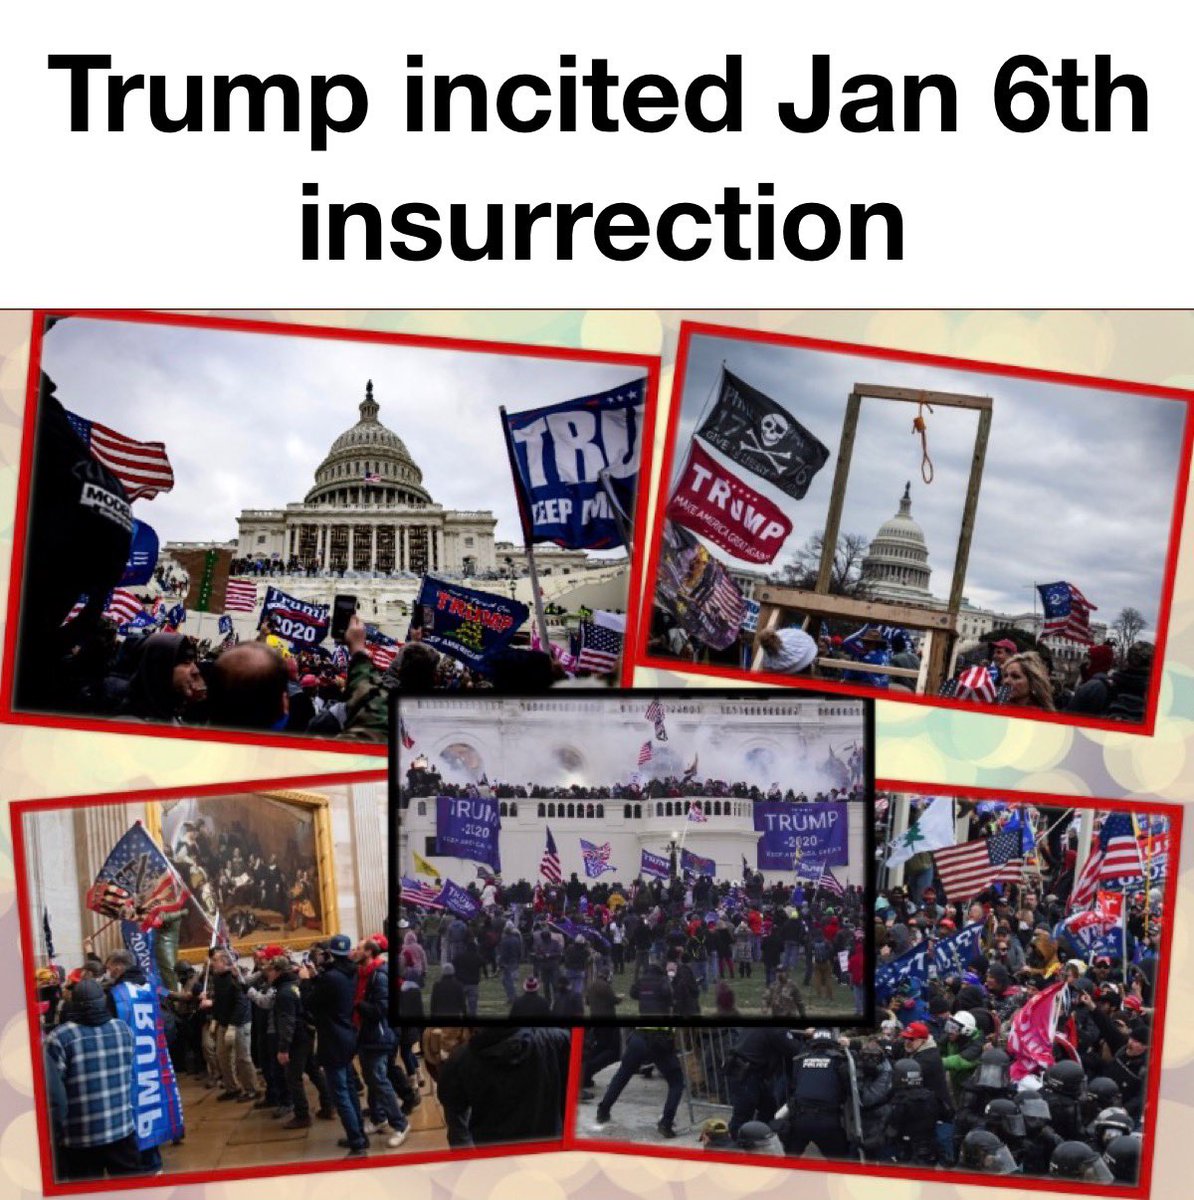 @VernonForGA But first .. some jail time for #trump inciting #insurrection #January6th

latimes.com/politics/story…

to overthrow #democracy and ruin America for our children

Jack Smith #SpecialCounsel reviewing evidence by @January6thCmte #January6thCommittee